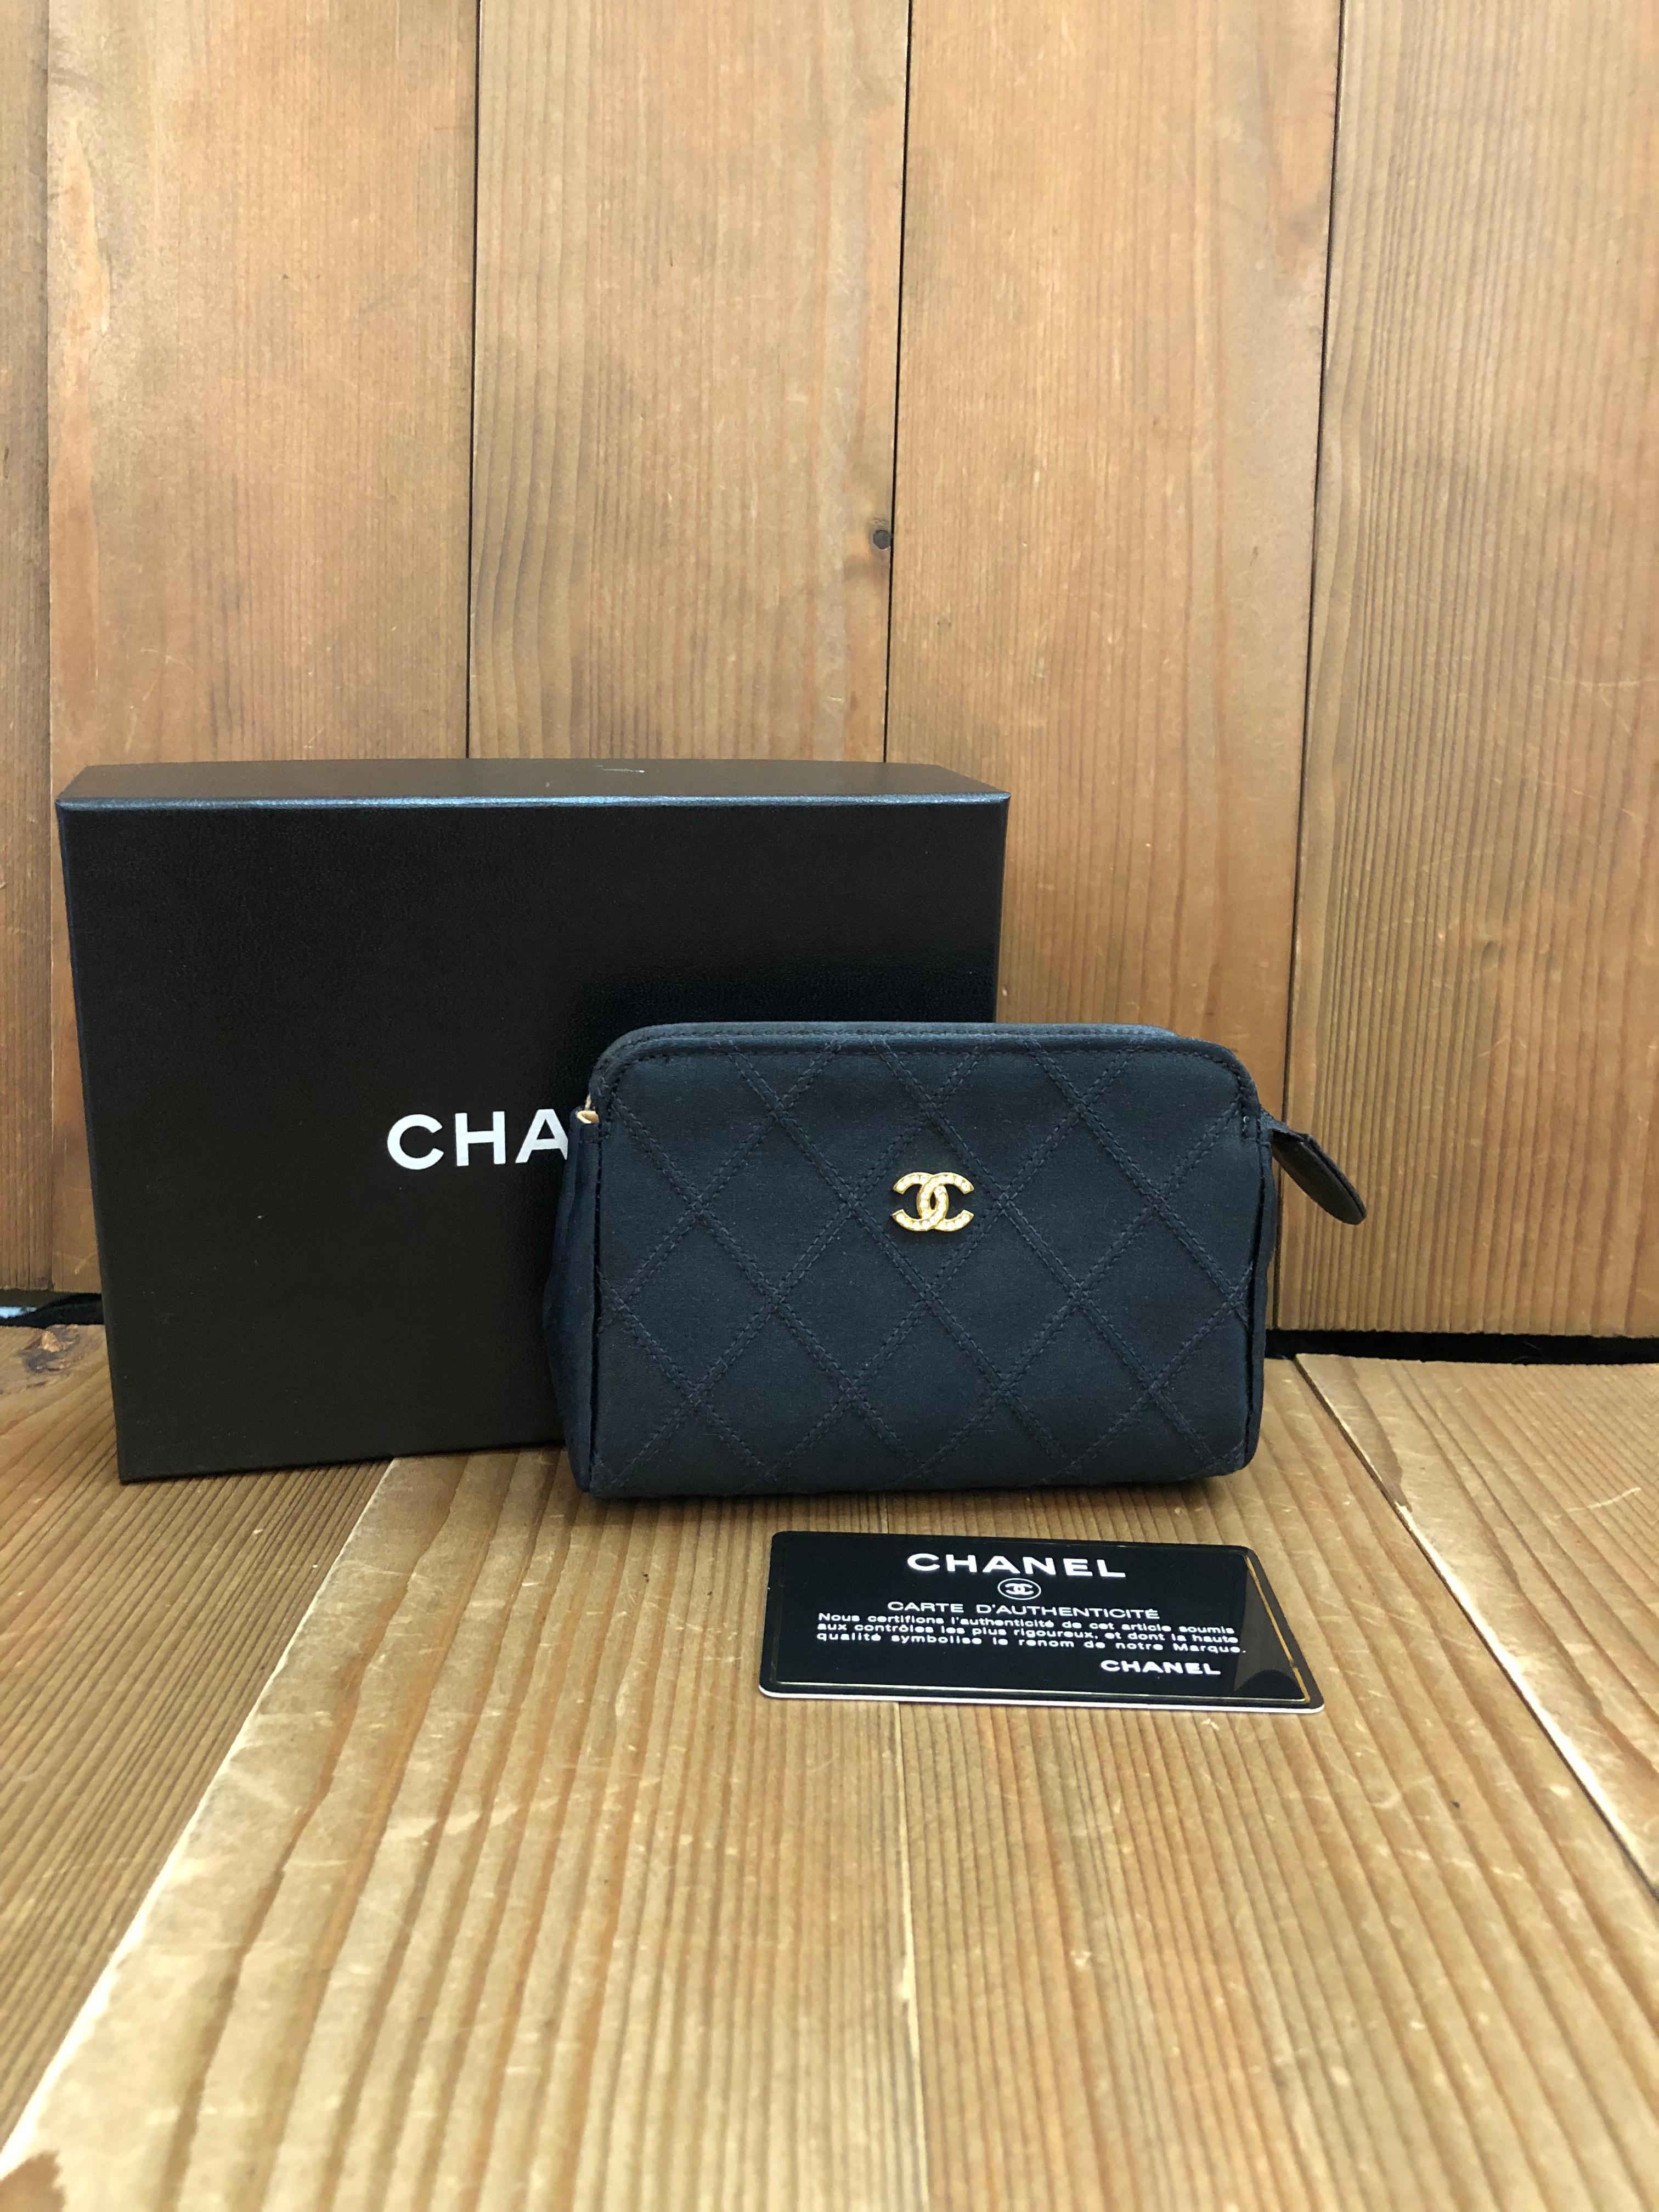 This vintage CHANEL mini pouch bag is crafted of black satin in diamond quilted pattern decorated with a gold toned rhinestone CC at the front. Top zipper closure opens to a new interior in beige. Measures approximately 4.75 x 3.25 x 1.5 inches.